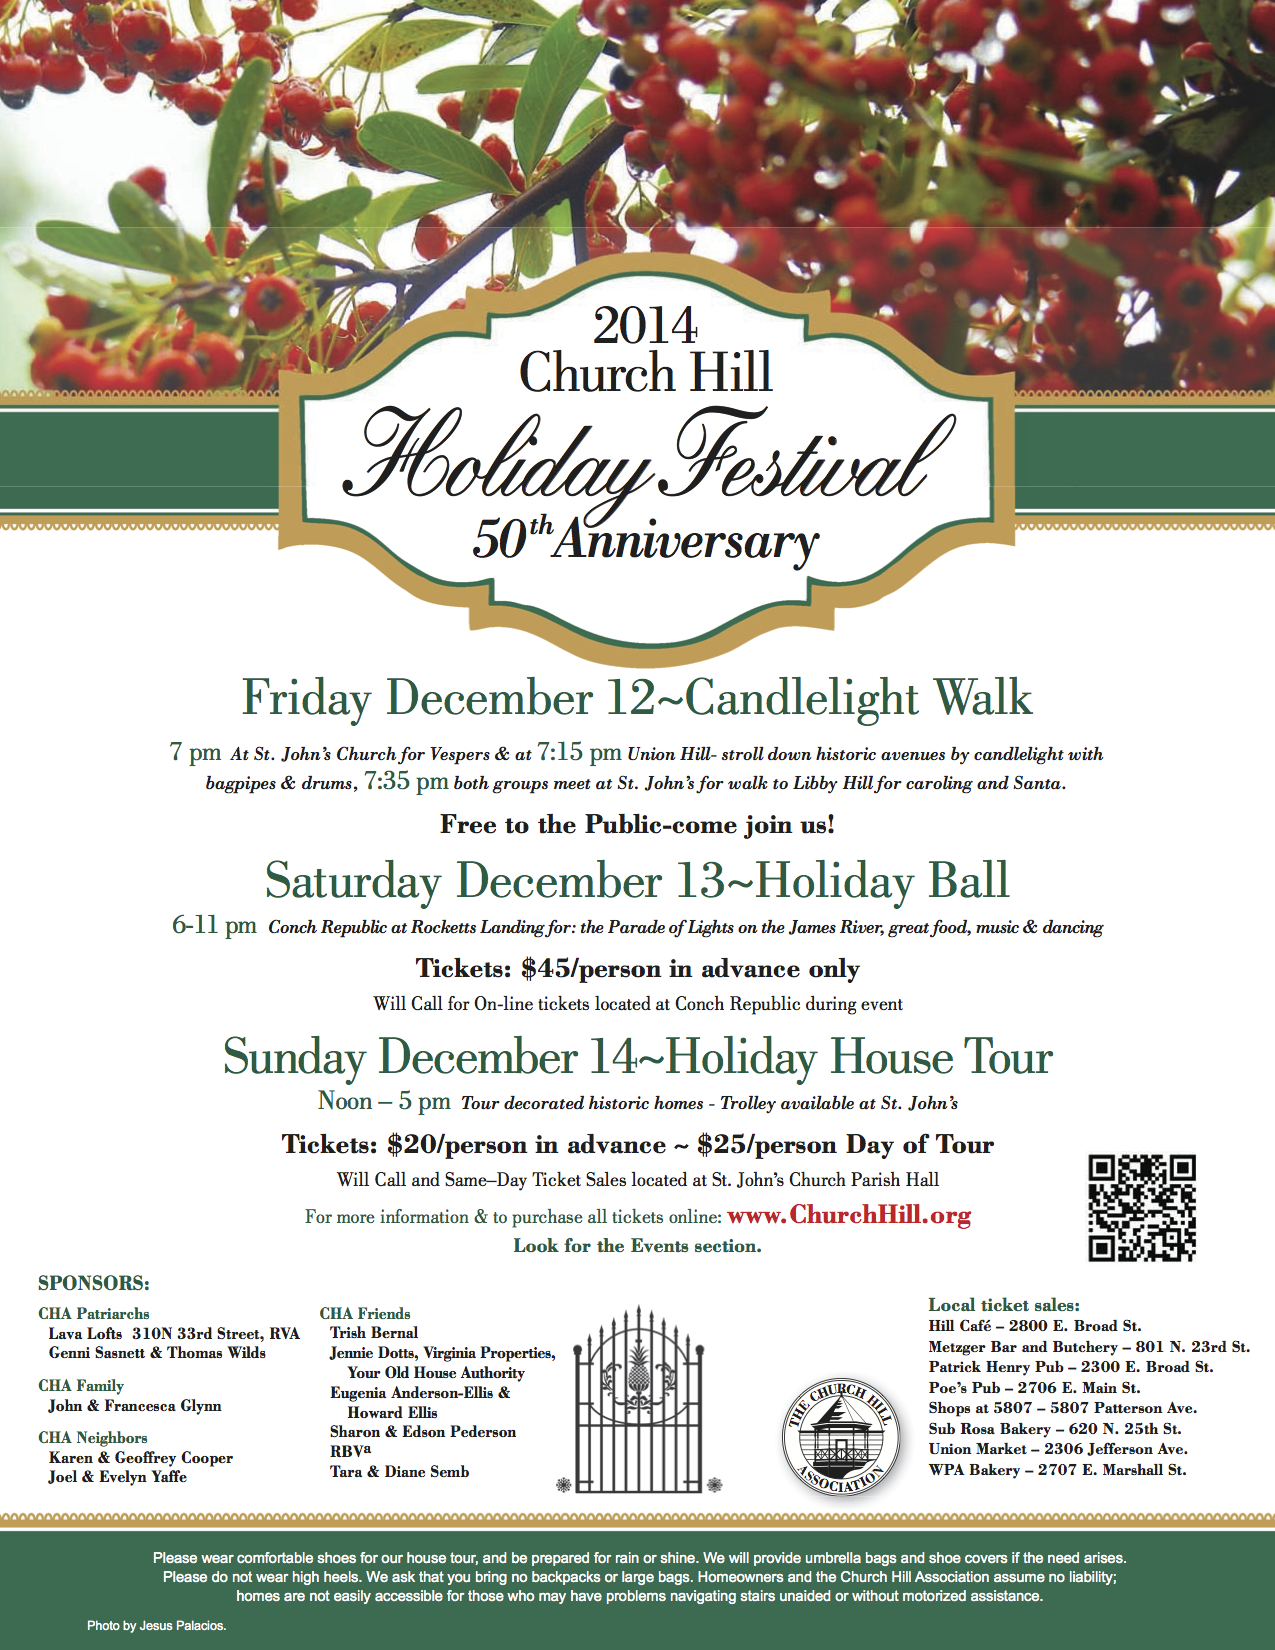 The Church Hill 50th Anniversary Holiday House Tour and Festival